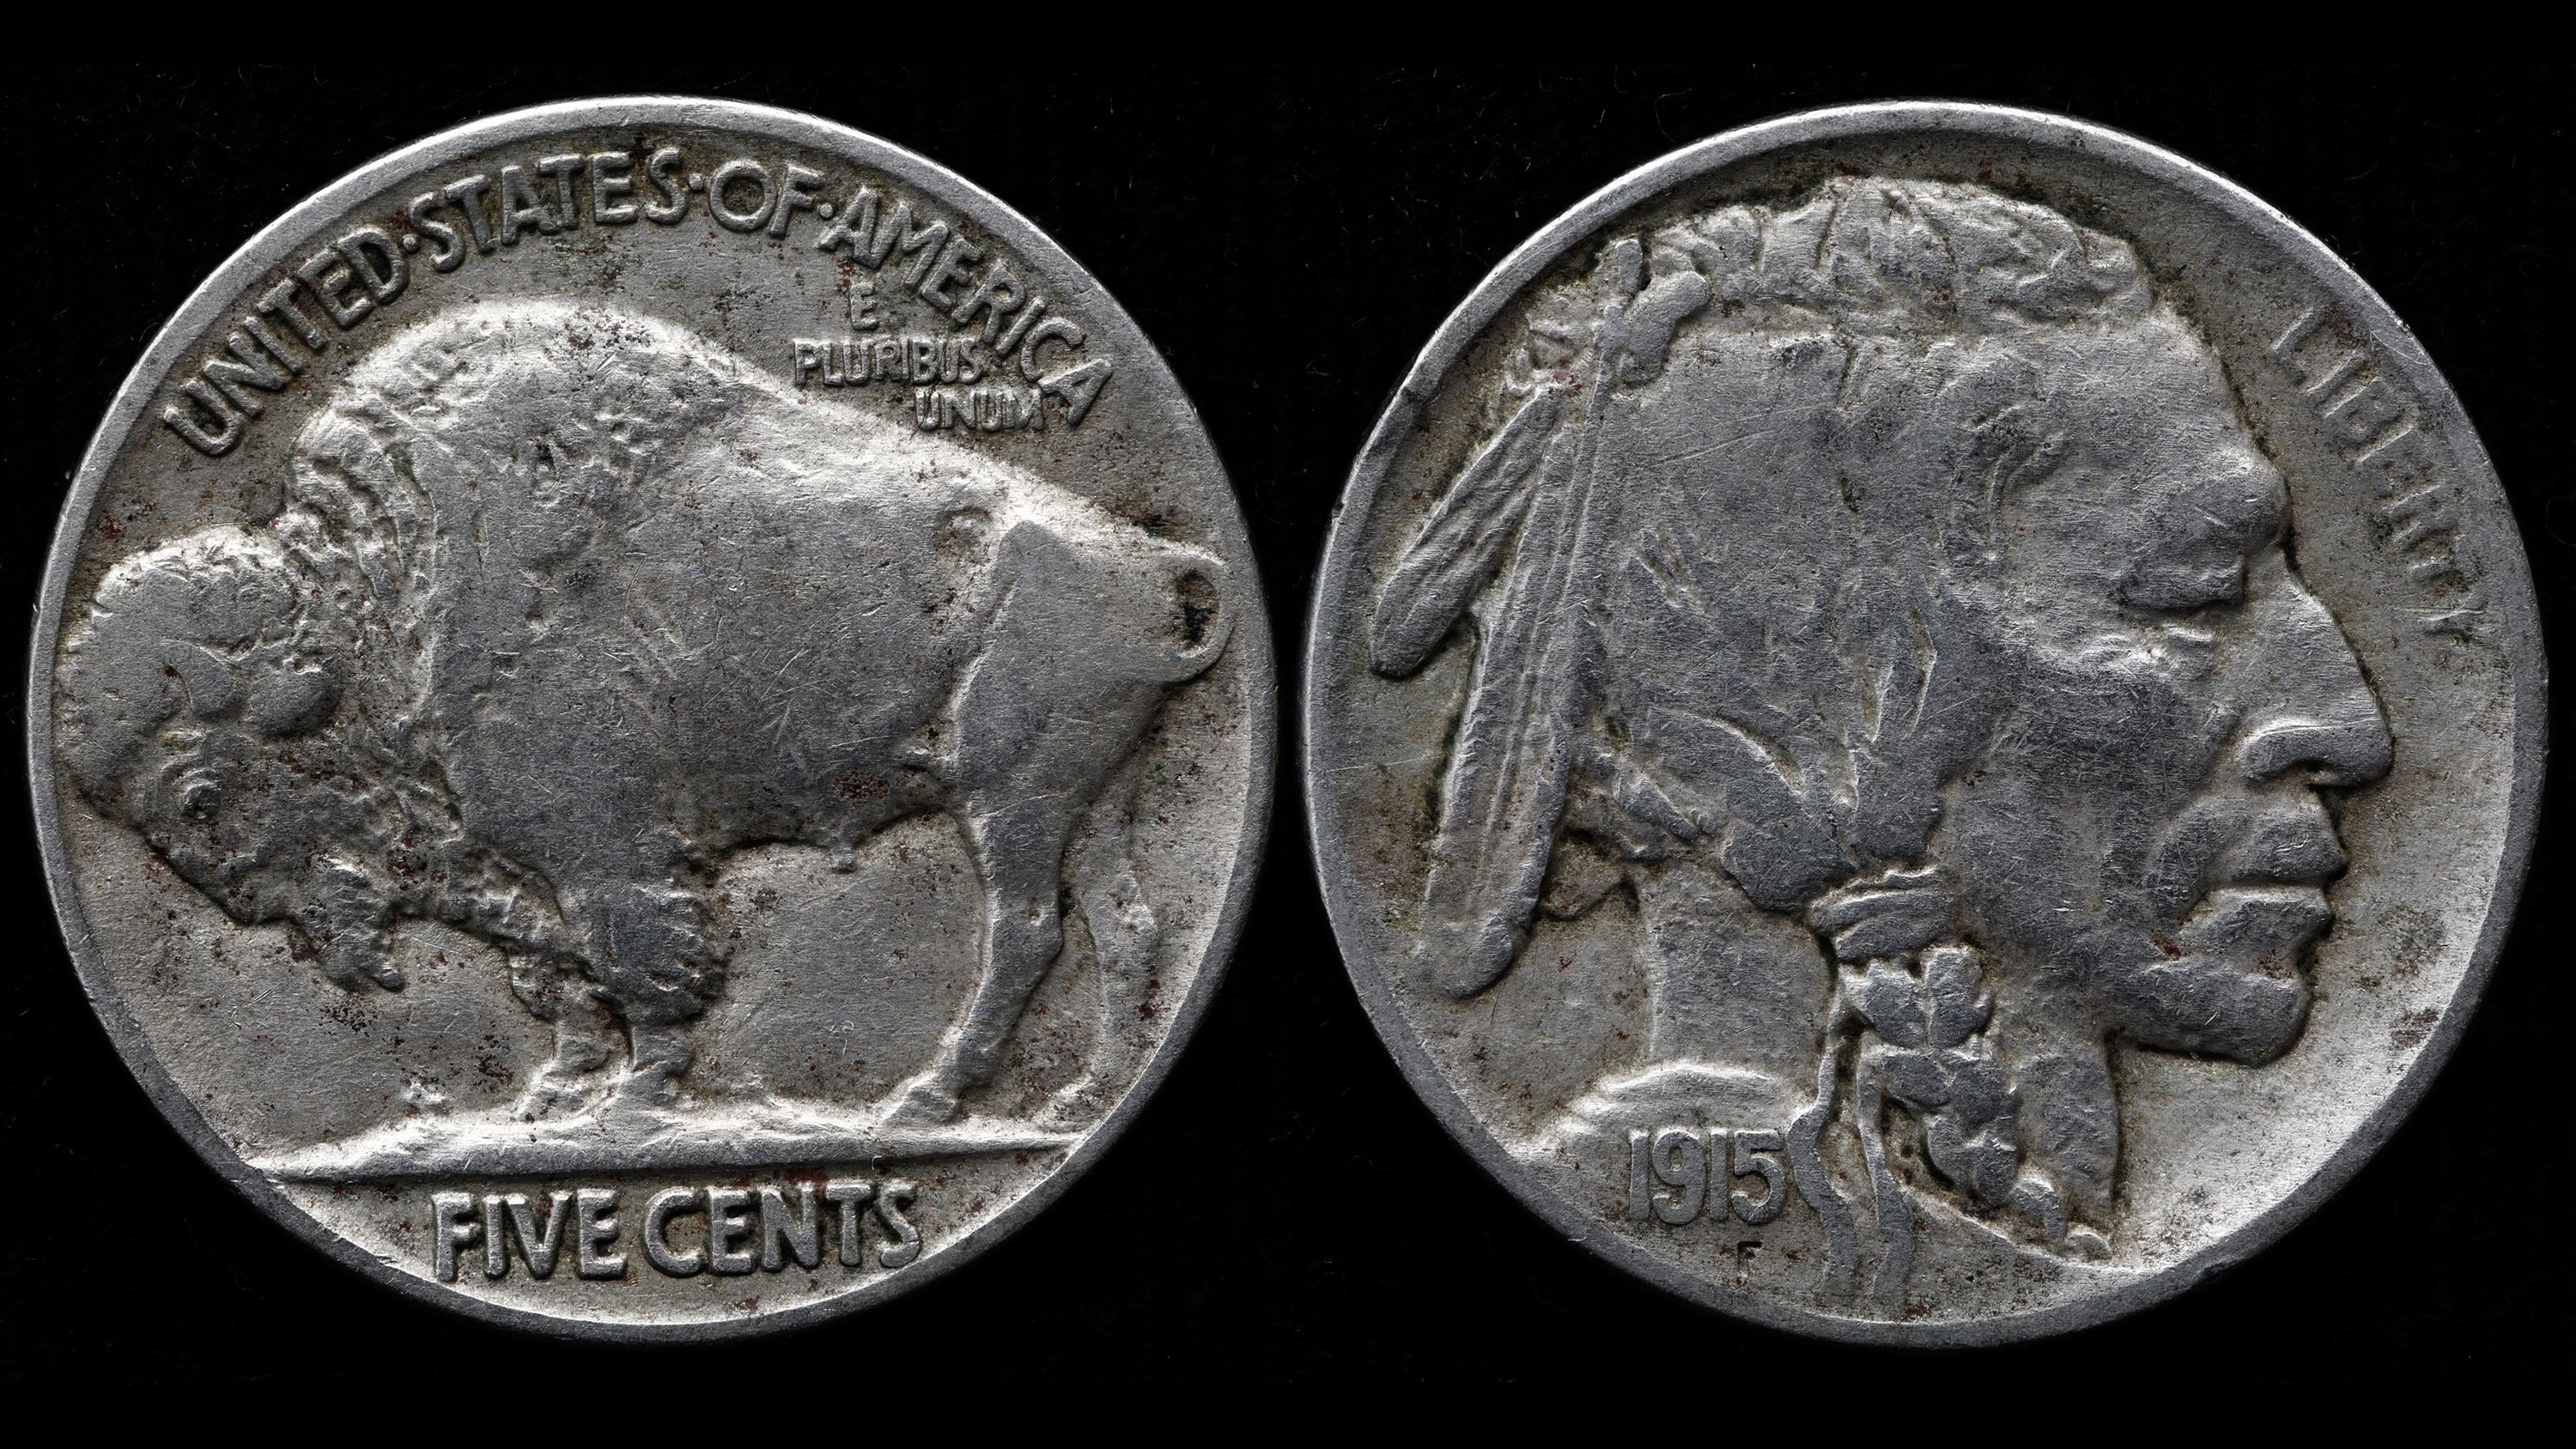 How to Find the Value of a Buffalo Nickel: Key Dates & More